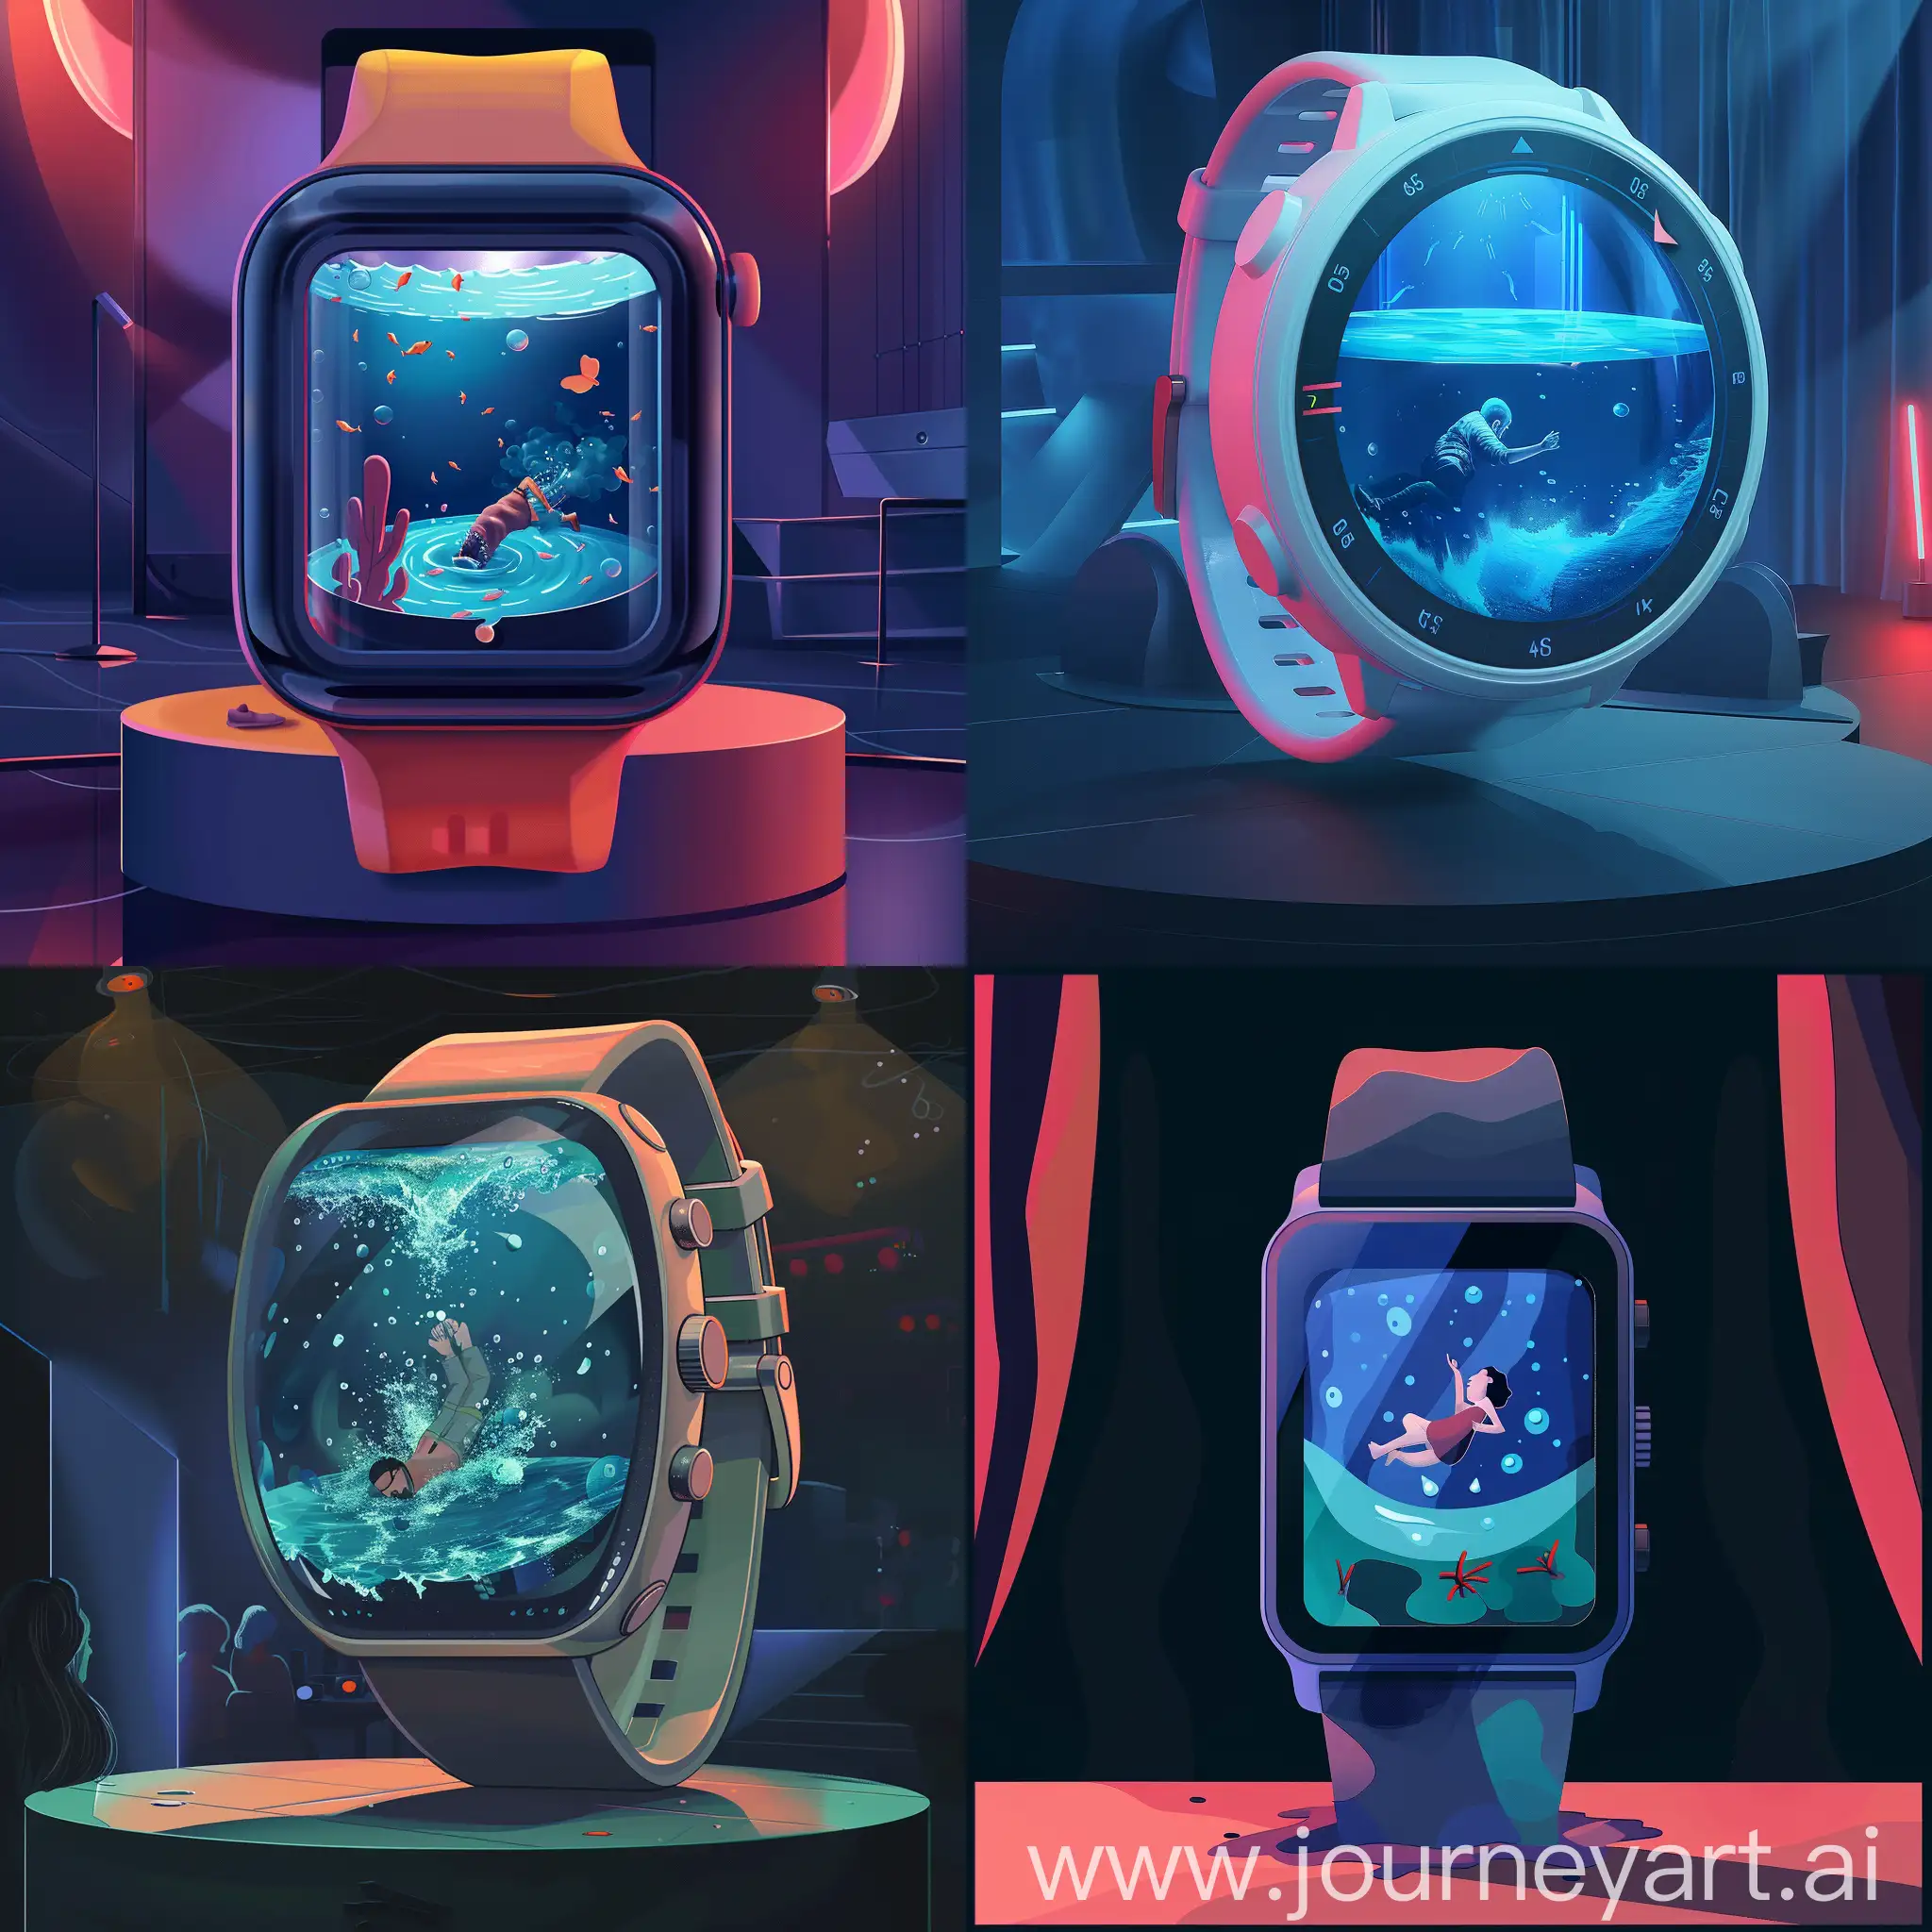 A smart watch with a sea inside its screen, and inside the sea a person is drowning, and the entire watch is placed on a stage, and I want the background to be simple so that we can use it in the design.